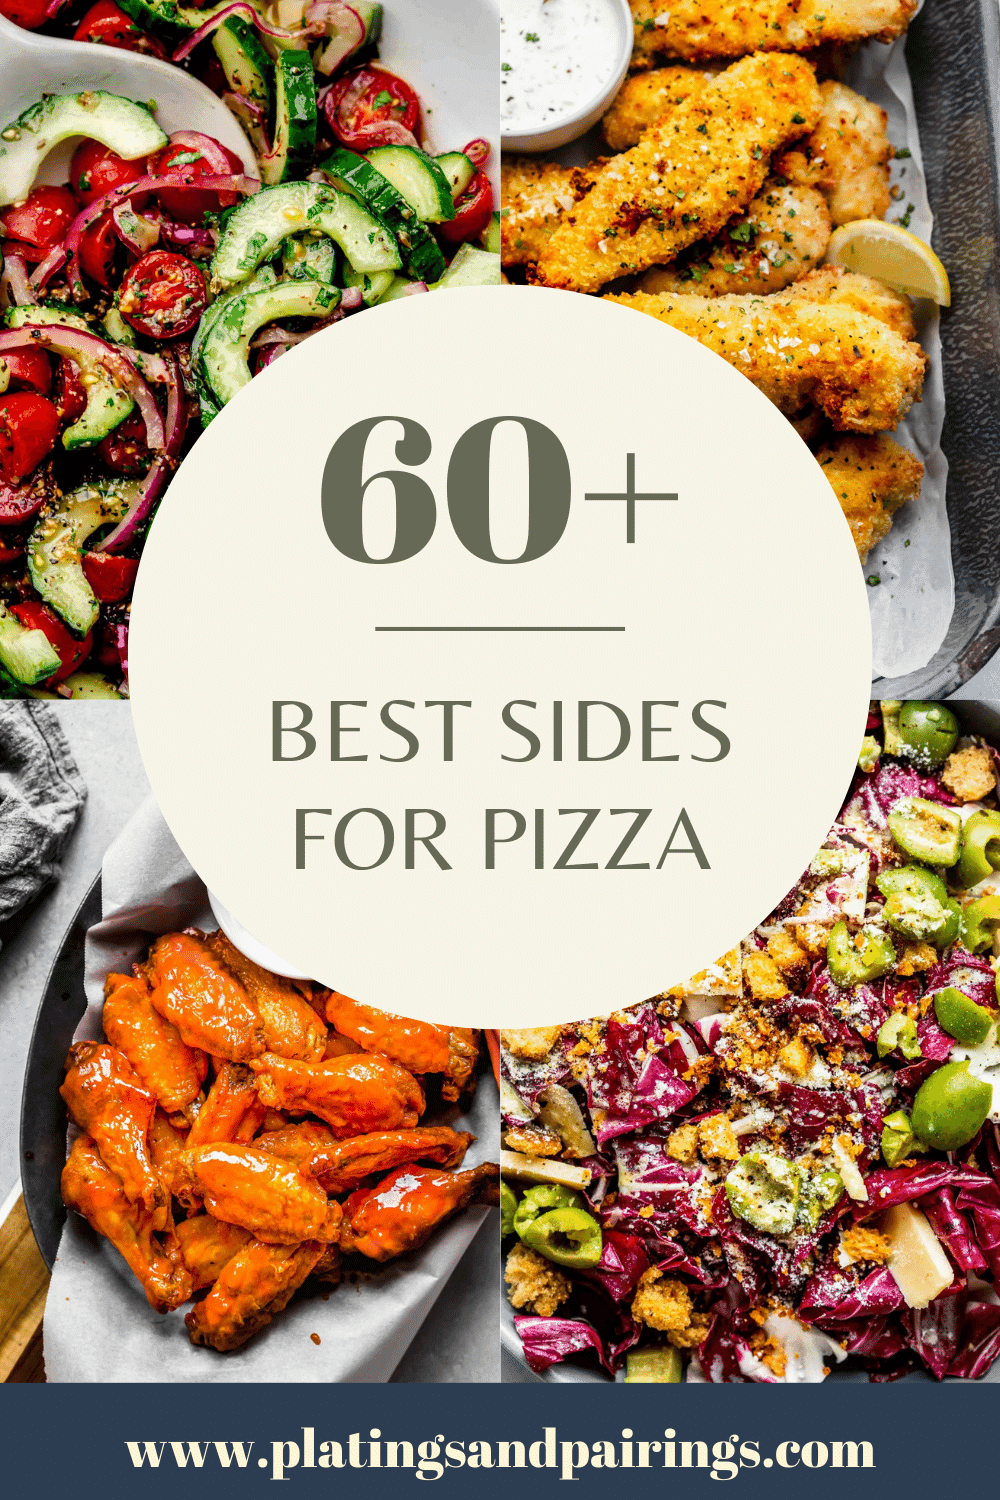 Collage of side dishes for pizza with text overlay.